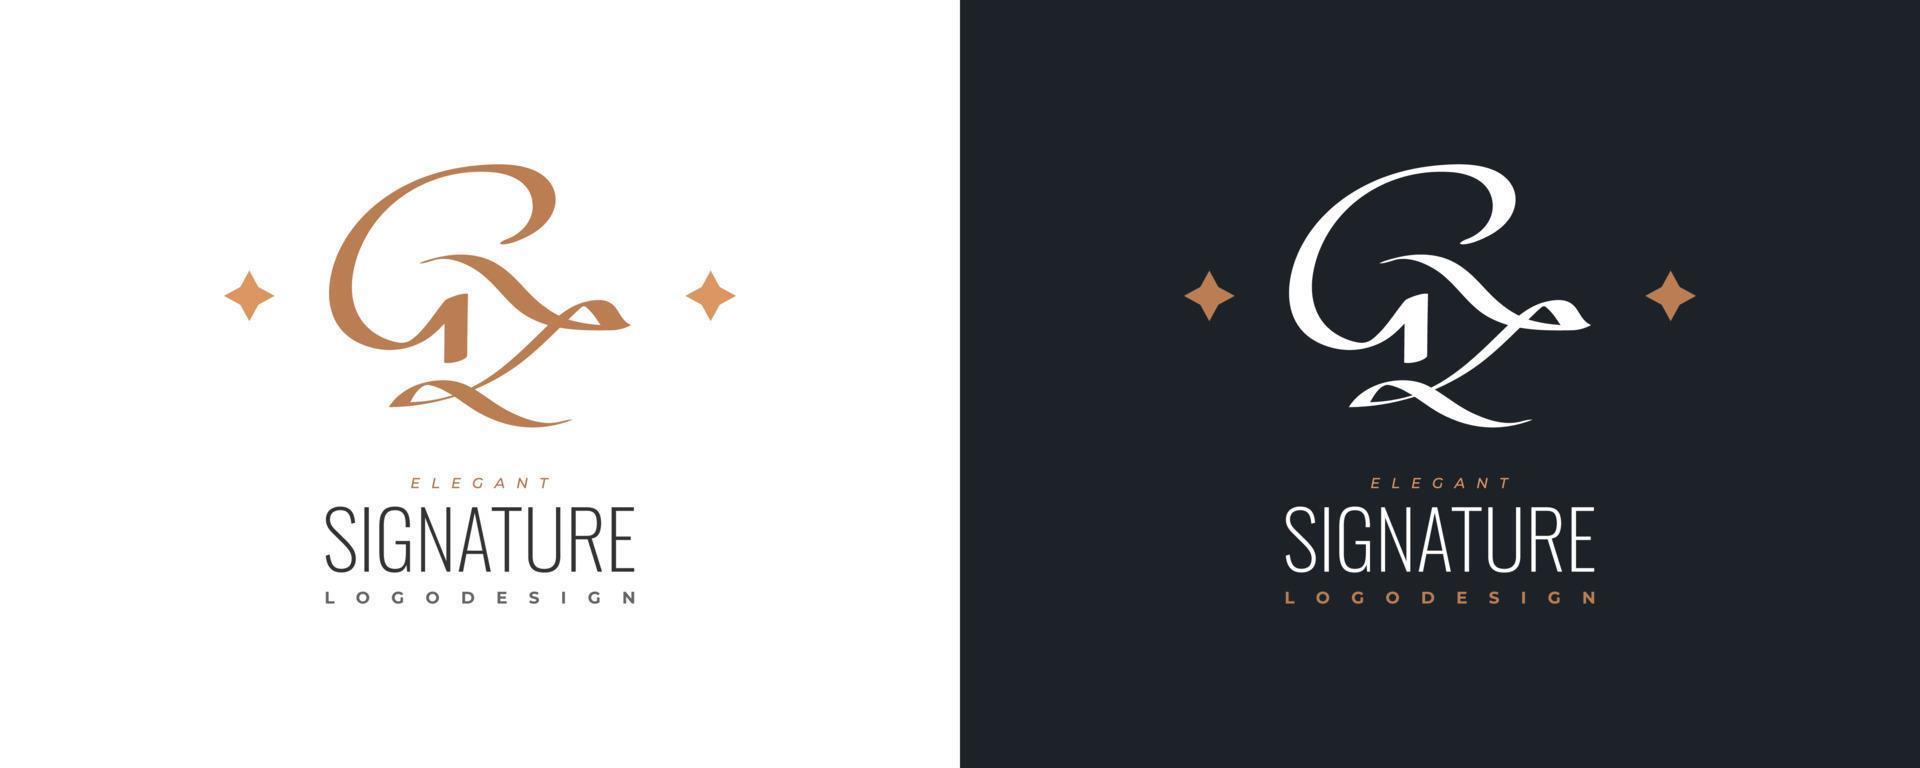 Initial G and Z Logo Design in Elegant and Minimalist Handwriting Style. GZ Signature Logo or Symbol for Wedding, Fashion, Jewelry, Boutique, and Business Identity vector